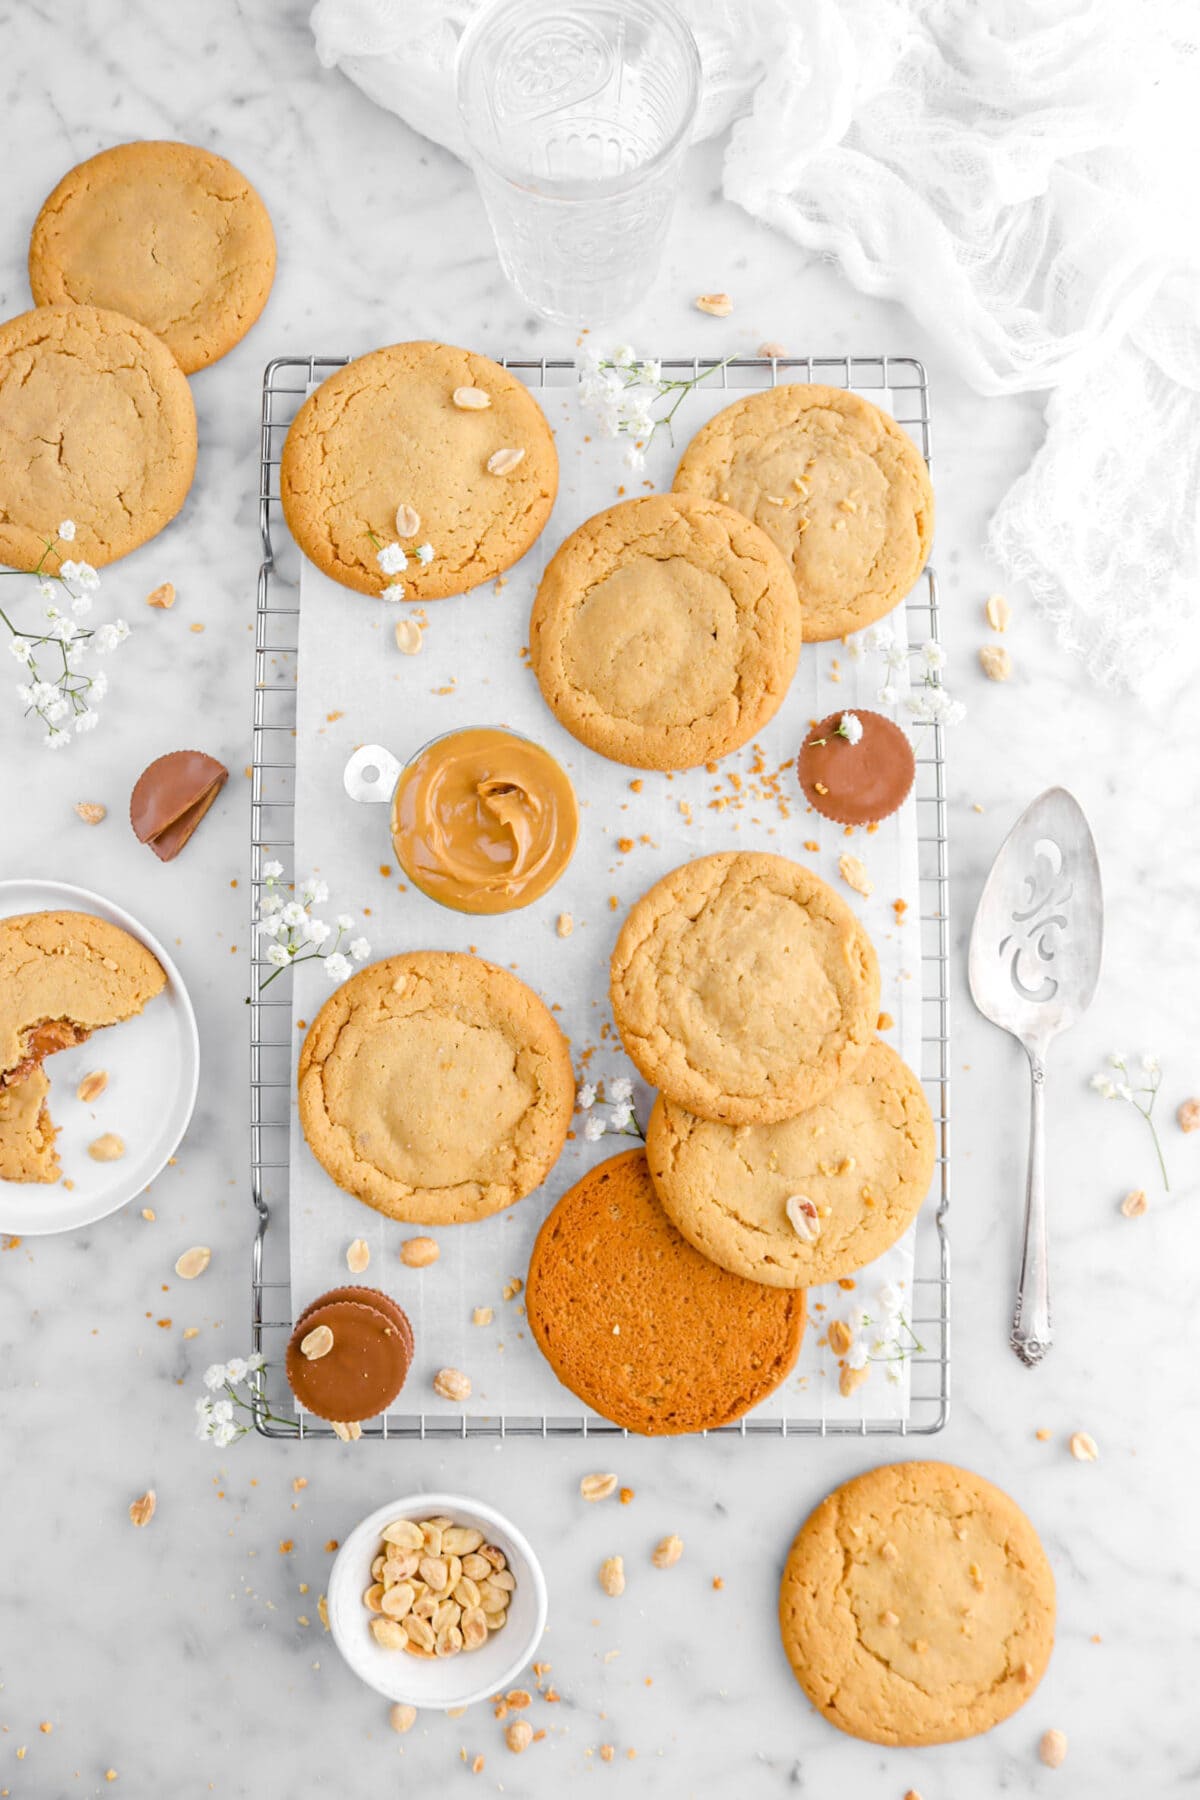 pulled back overhead shot of seven peanut butter cookies on cooling rack with measuring cup of peanut butter, peanut butte cups, peanuts, and white flowers on cooling rack with more cookies around, plate of broken in half cookie beside, and cake knife on marble surface.